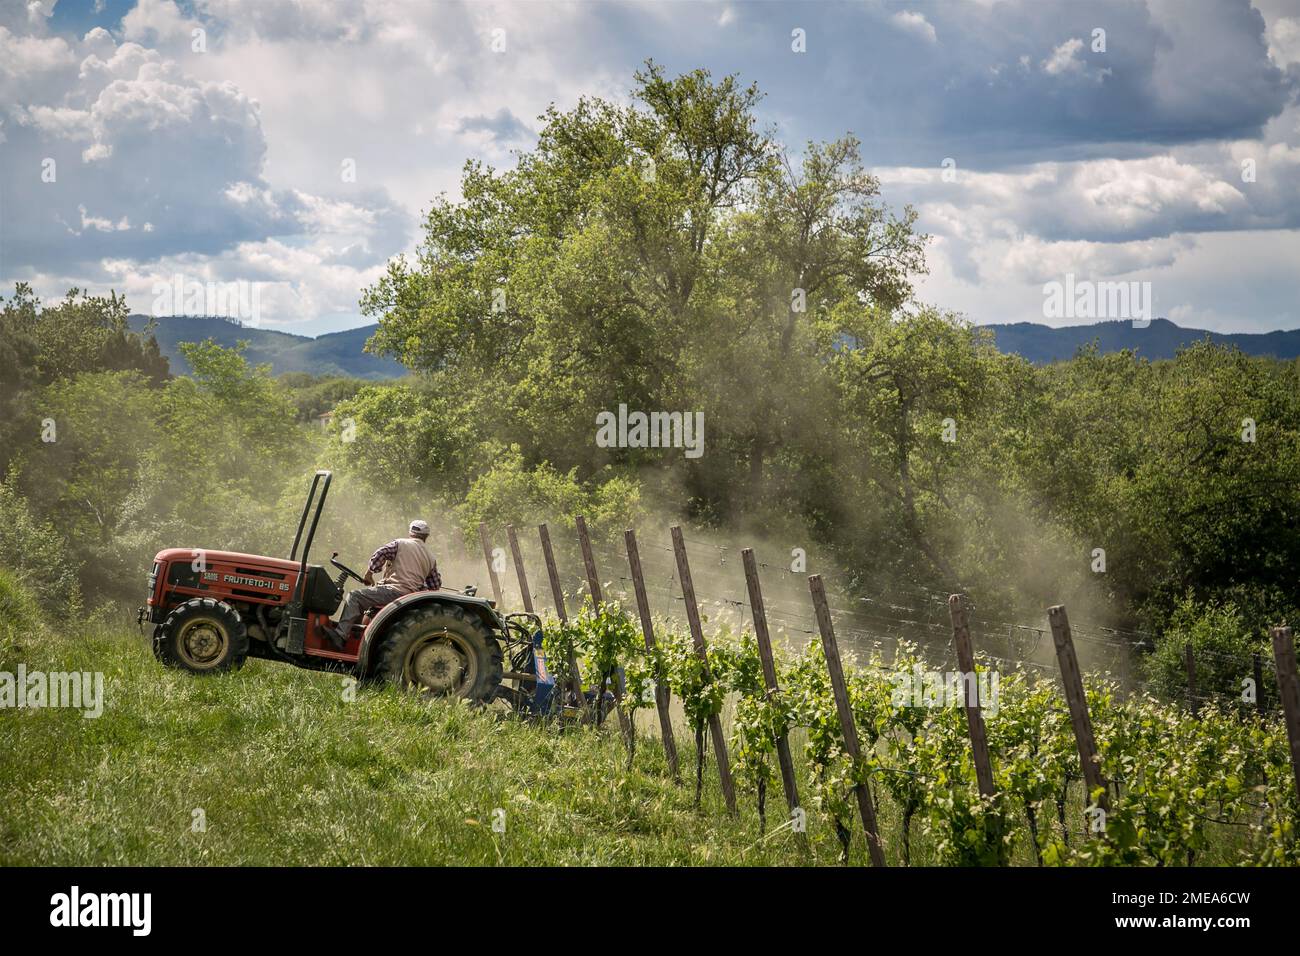 Farmer on tractor working the vineyard in springtime, Tuscany, Italy. Stock Photo